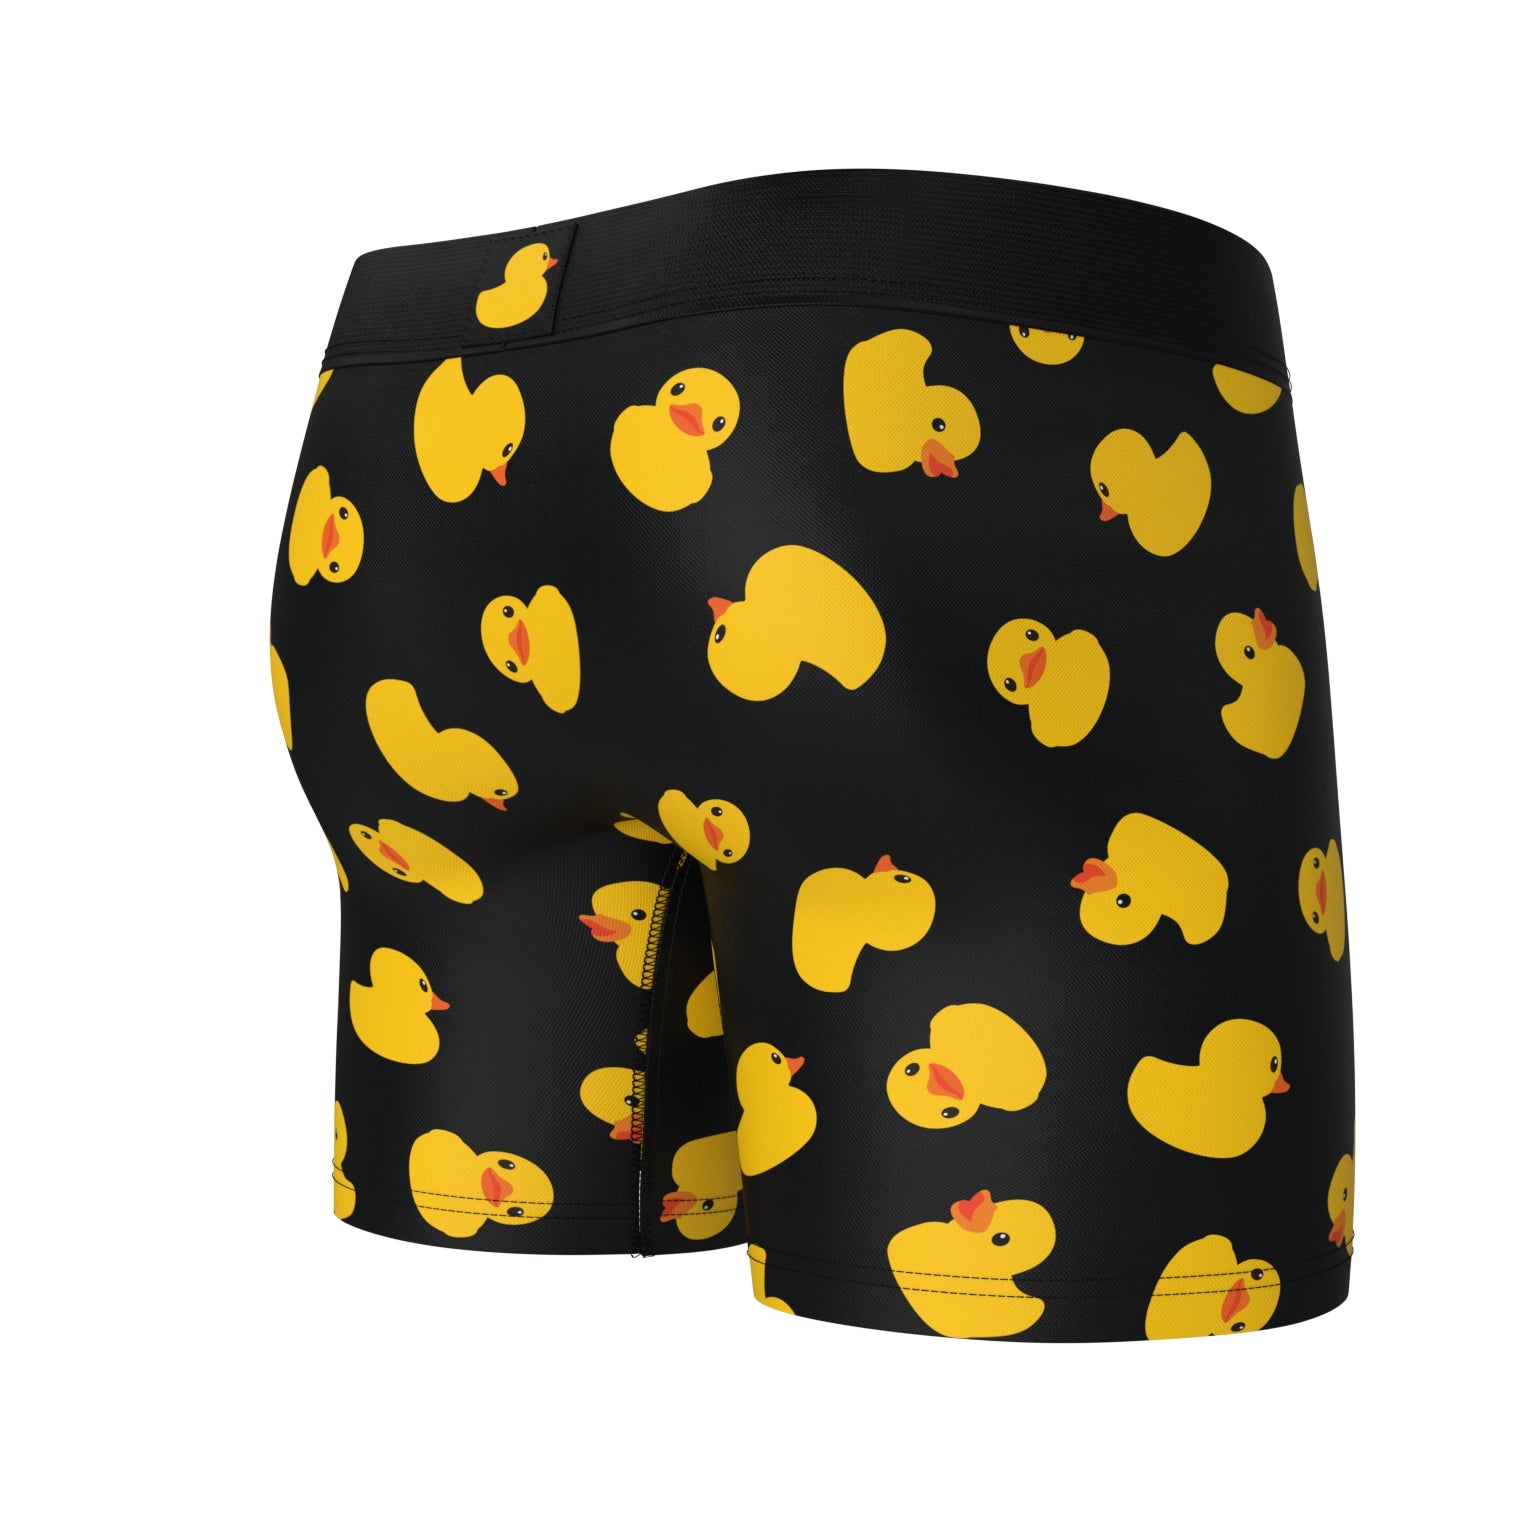 SWAG JUST DUCKY BOXERS